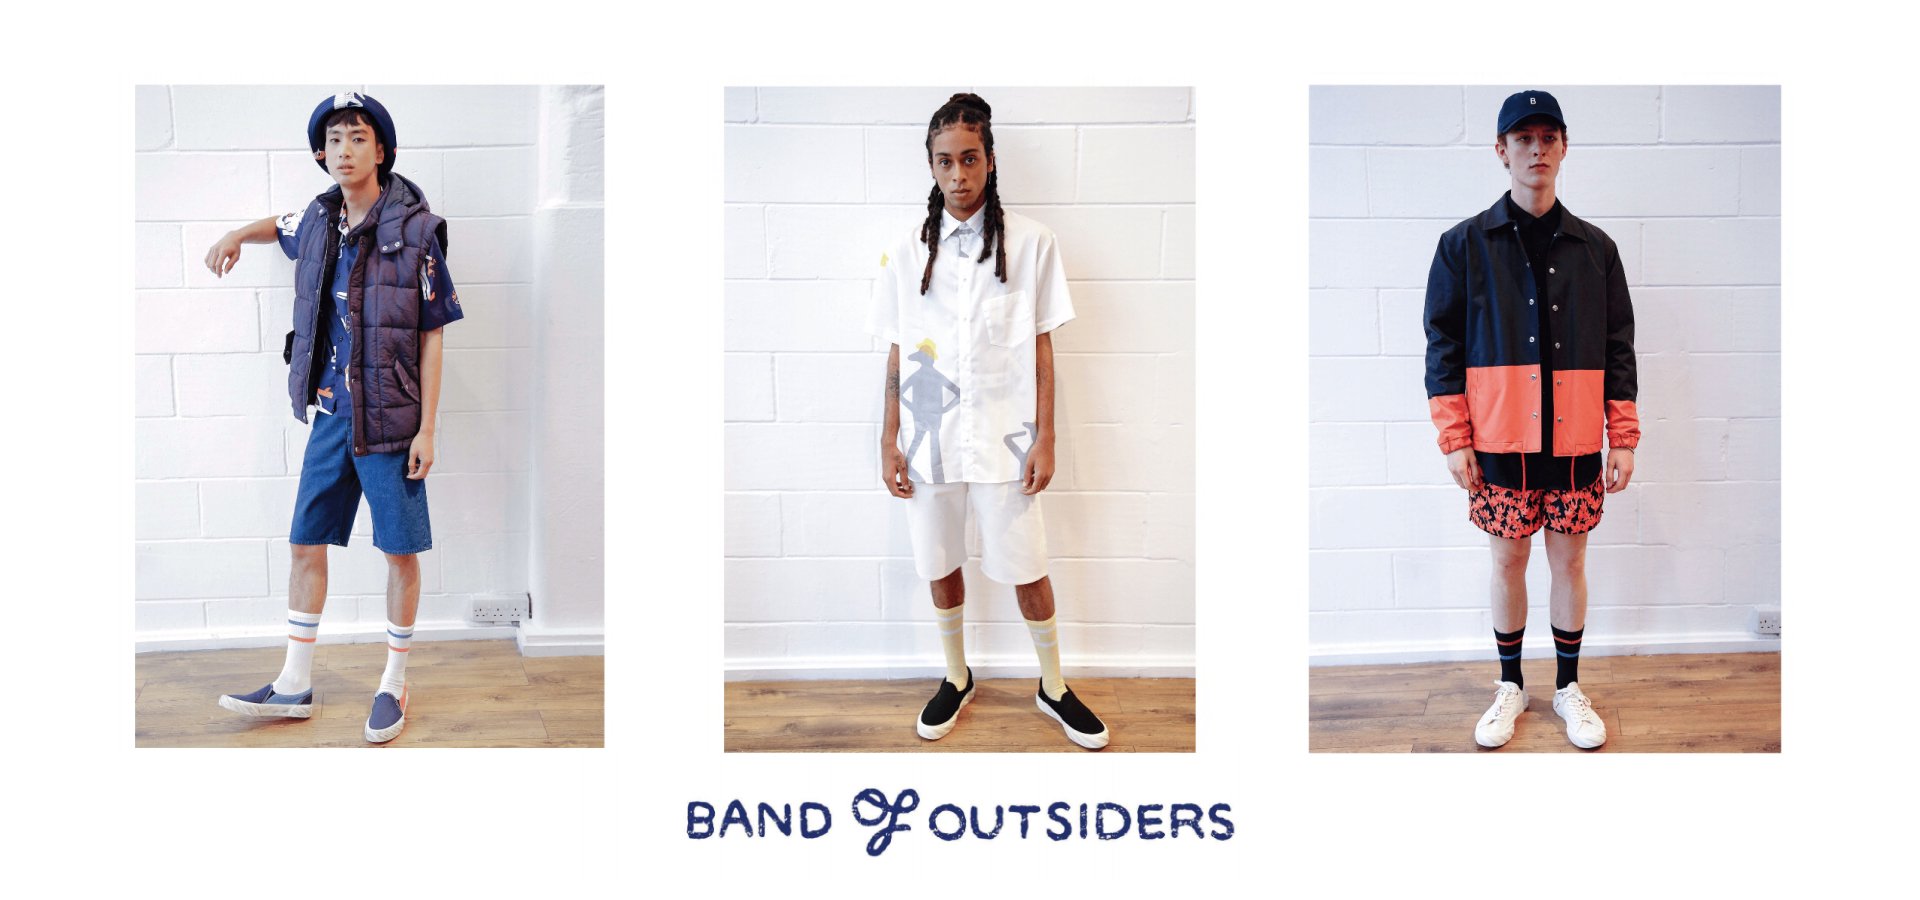 BAND OF OUTSIDERS - Time is on